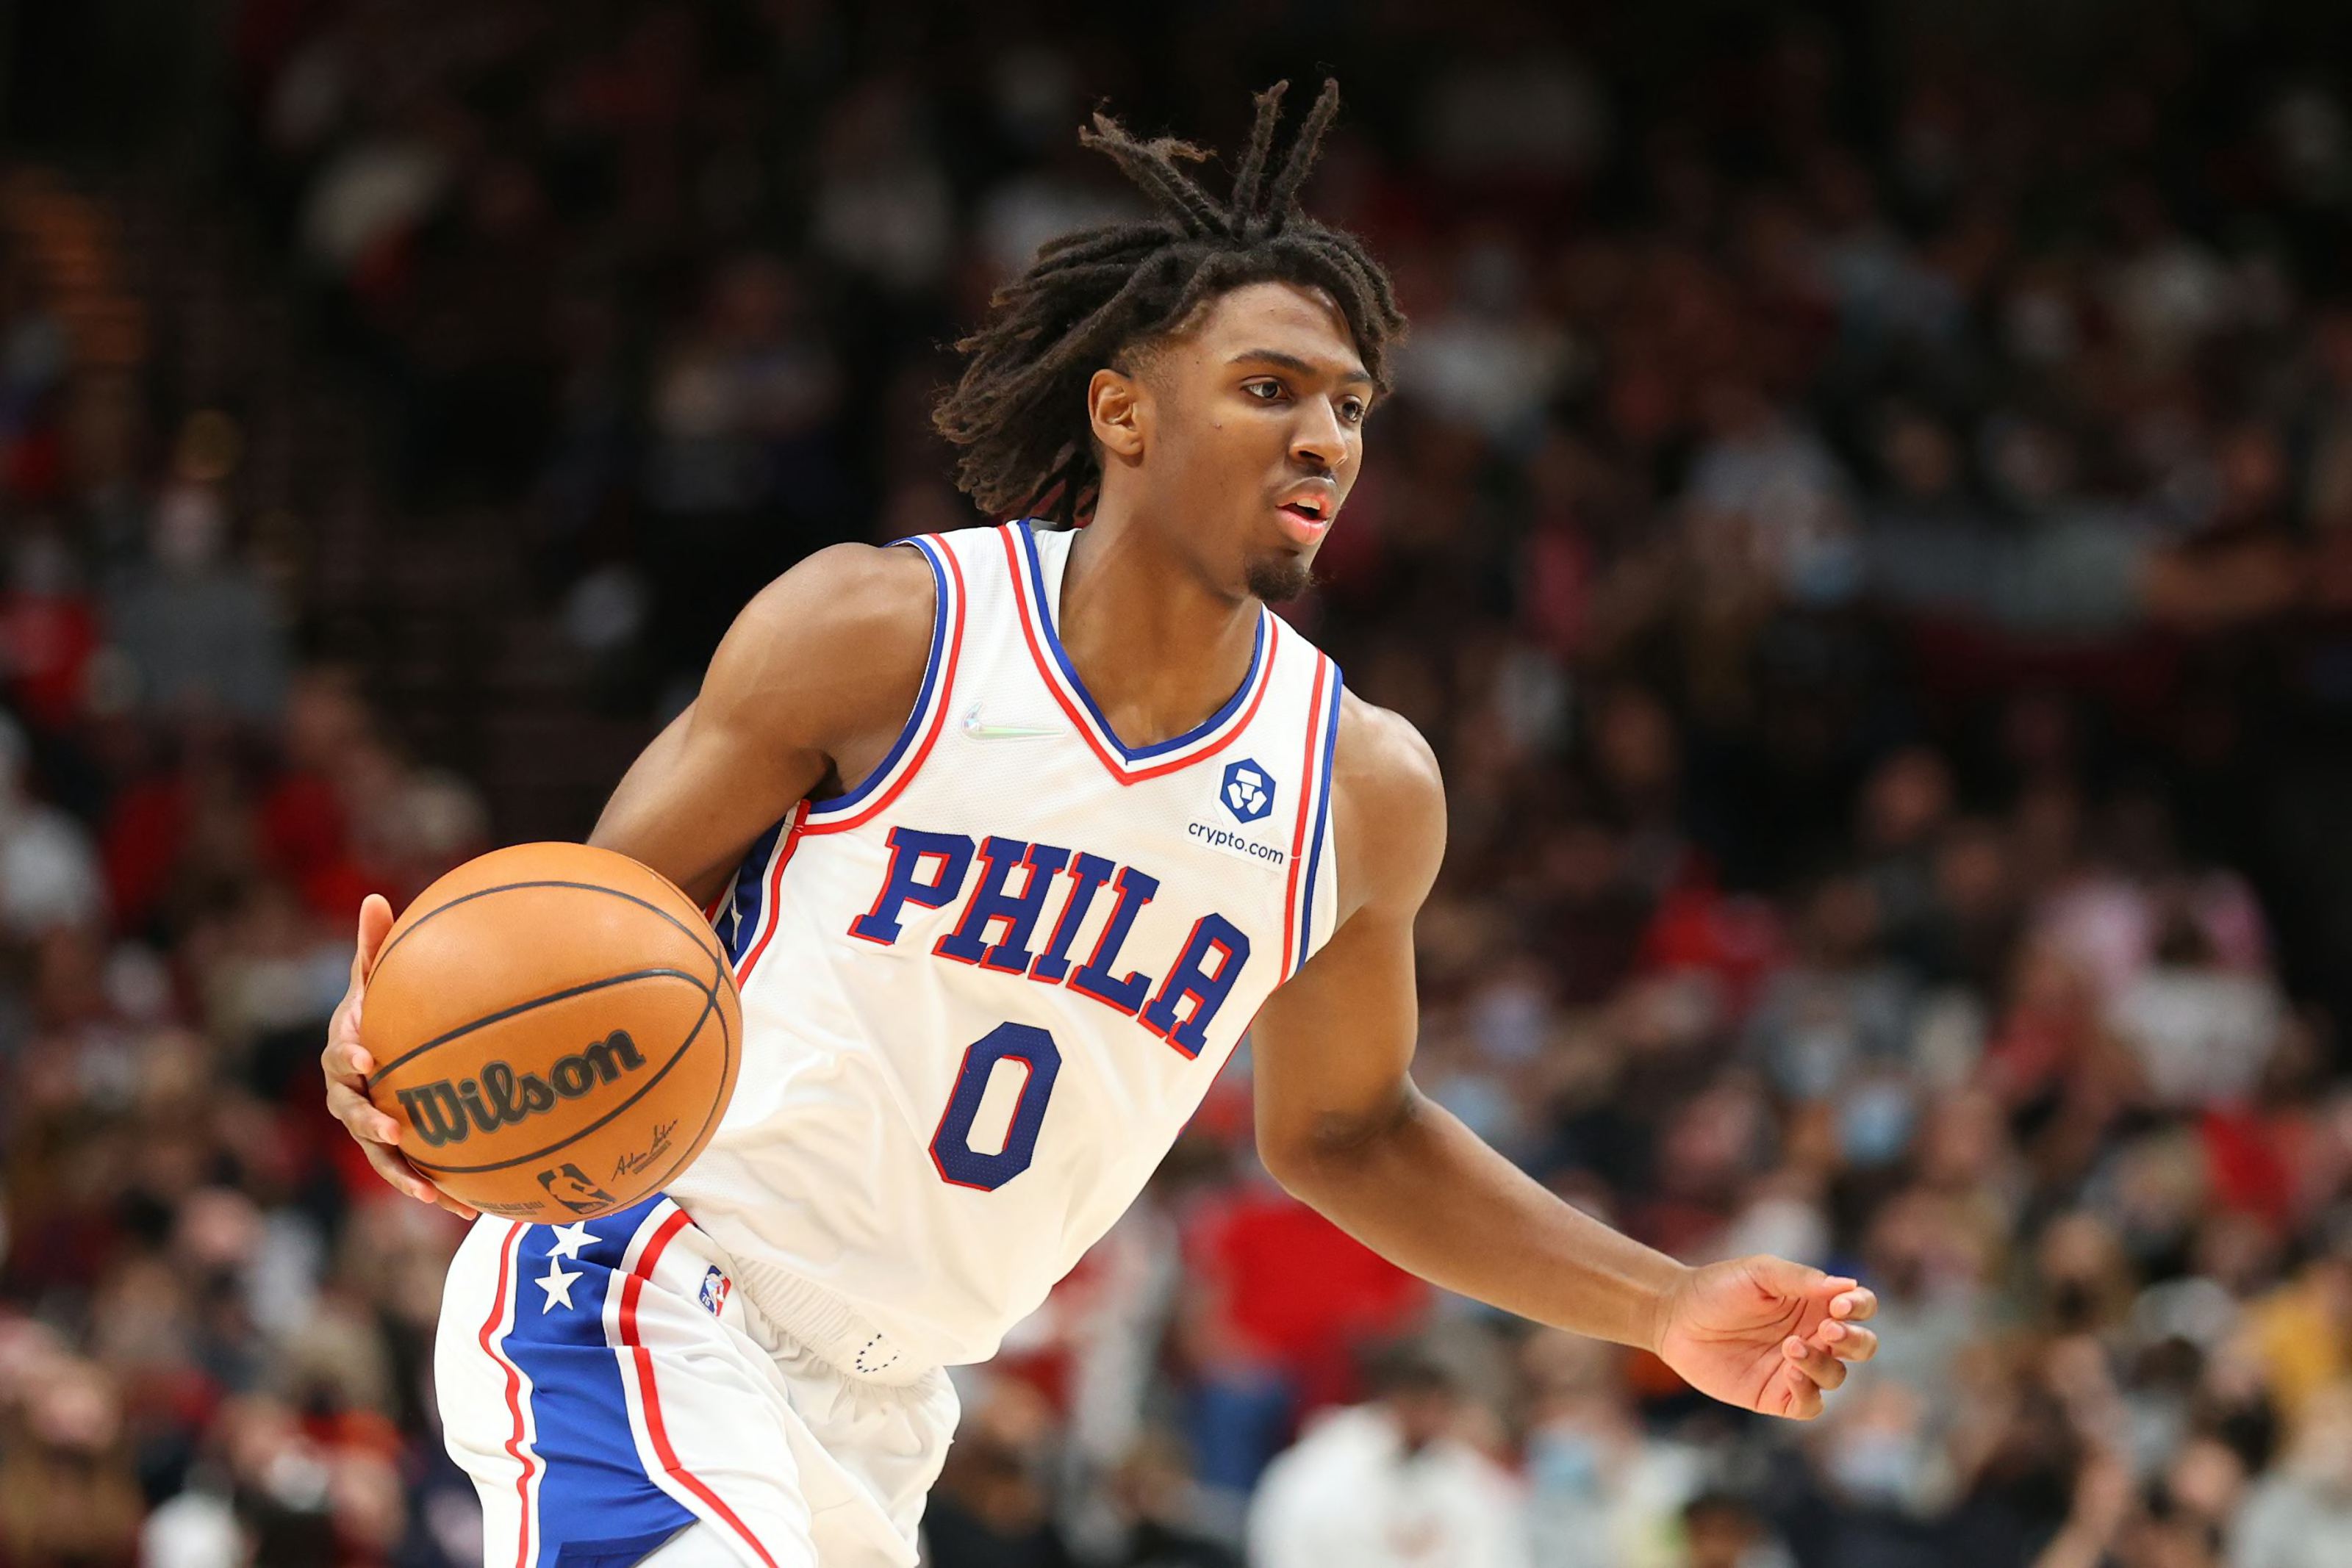 Philadelphia 76ers - no doubt about it. Tyrese Maxey has been